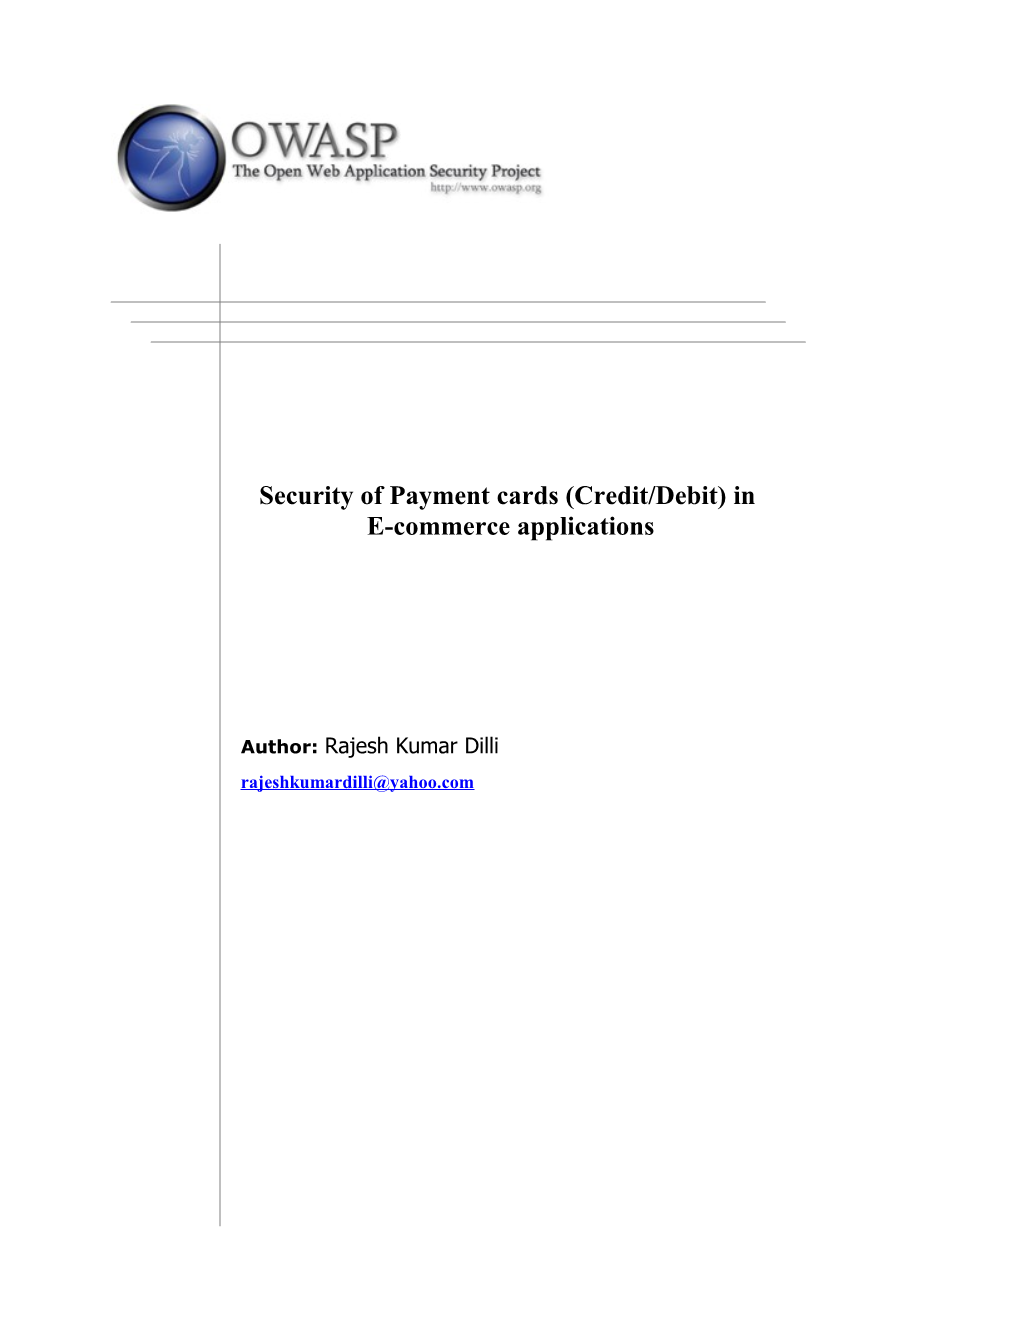 Security Of Payment Cards (Credit/Debit) Used In Applications